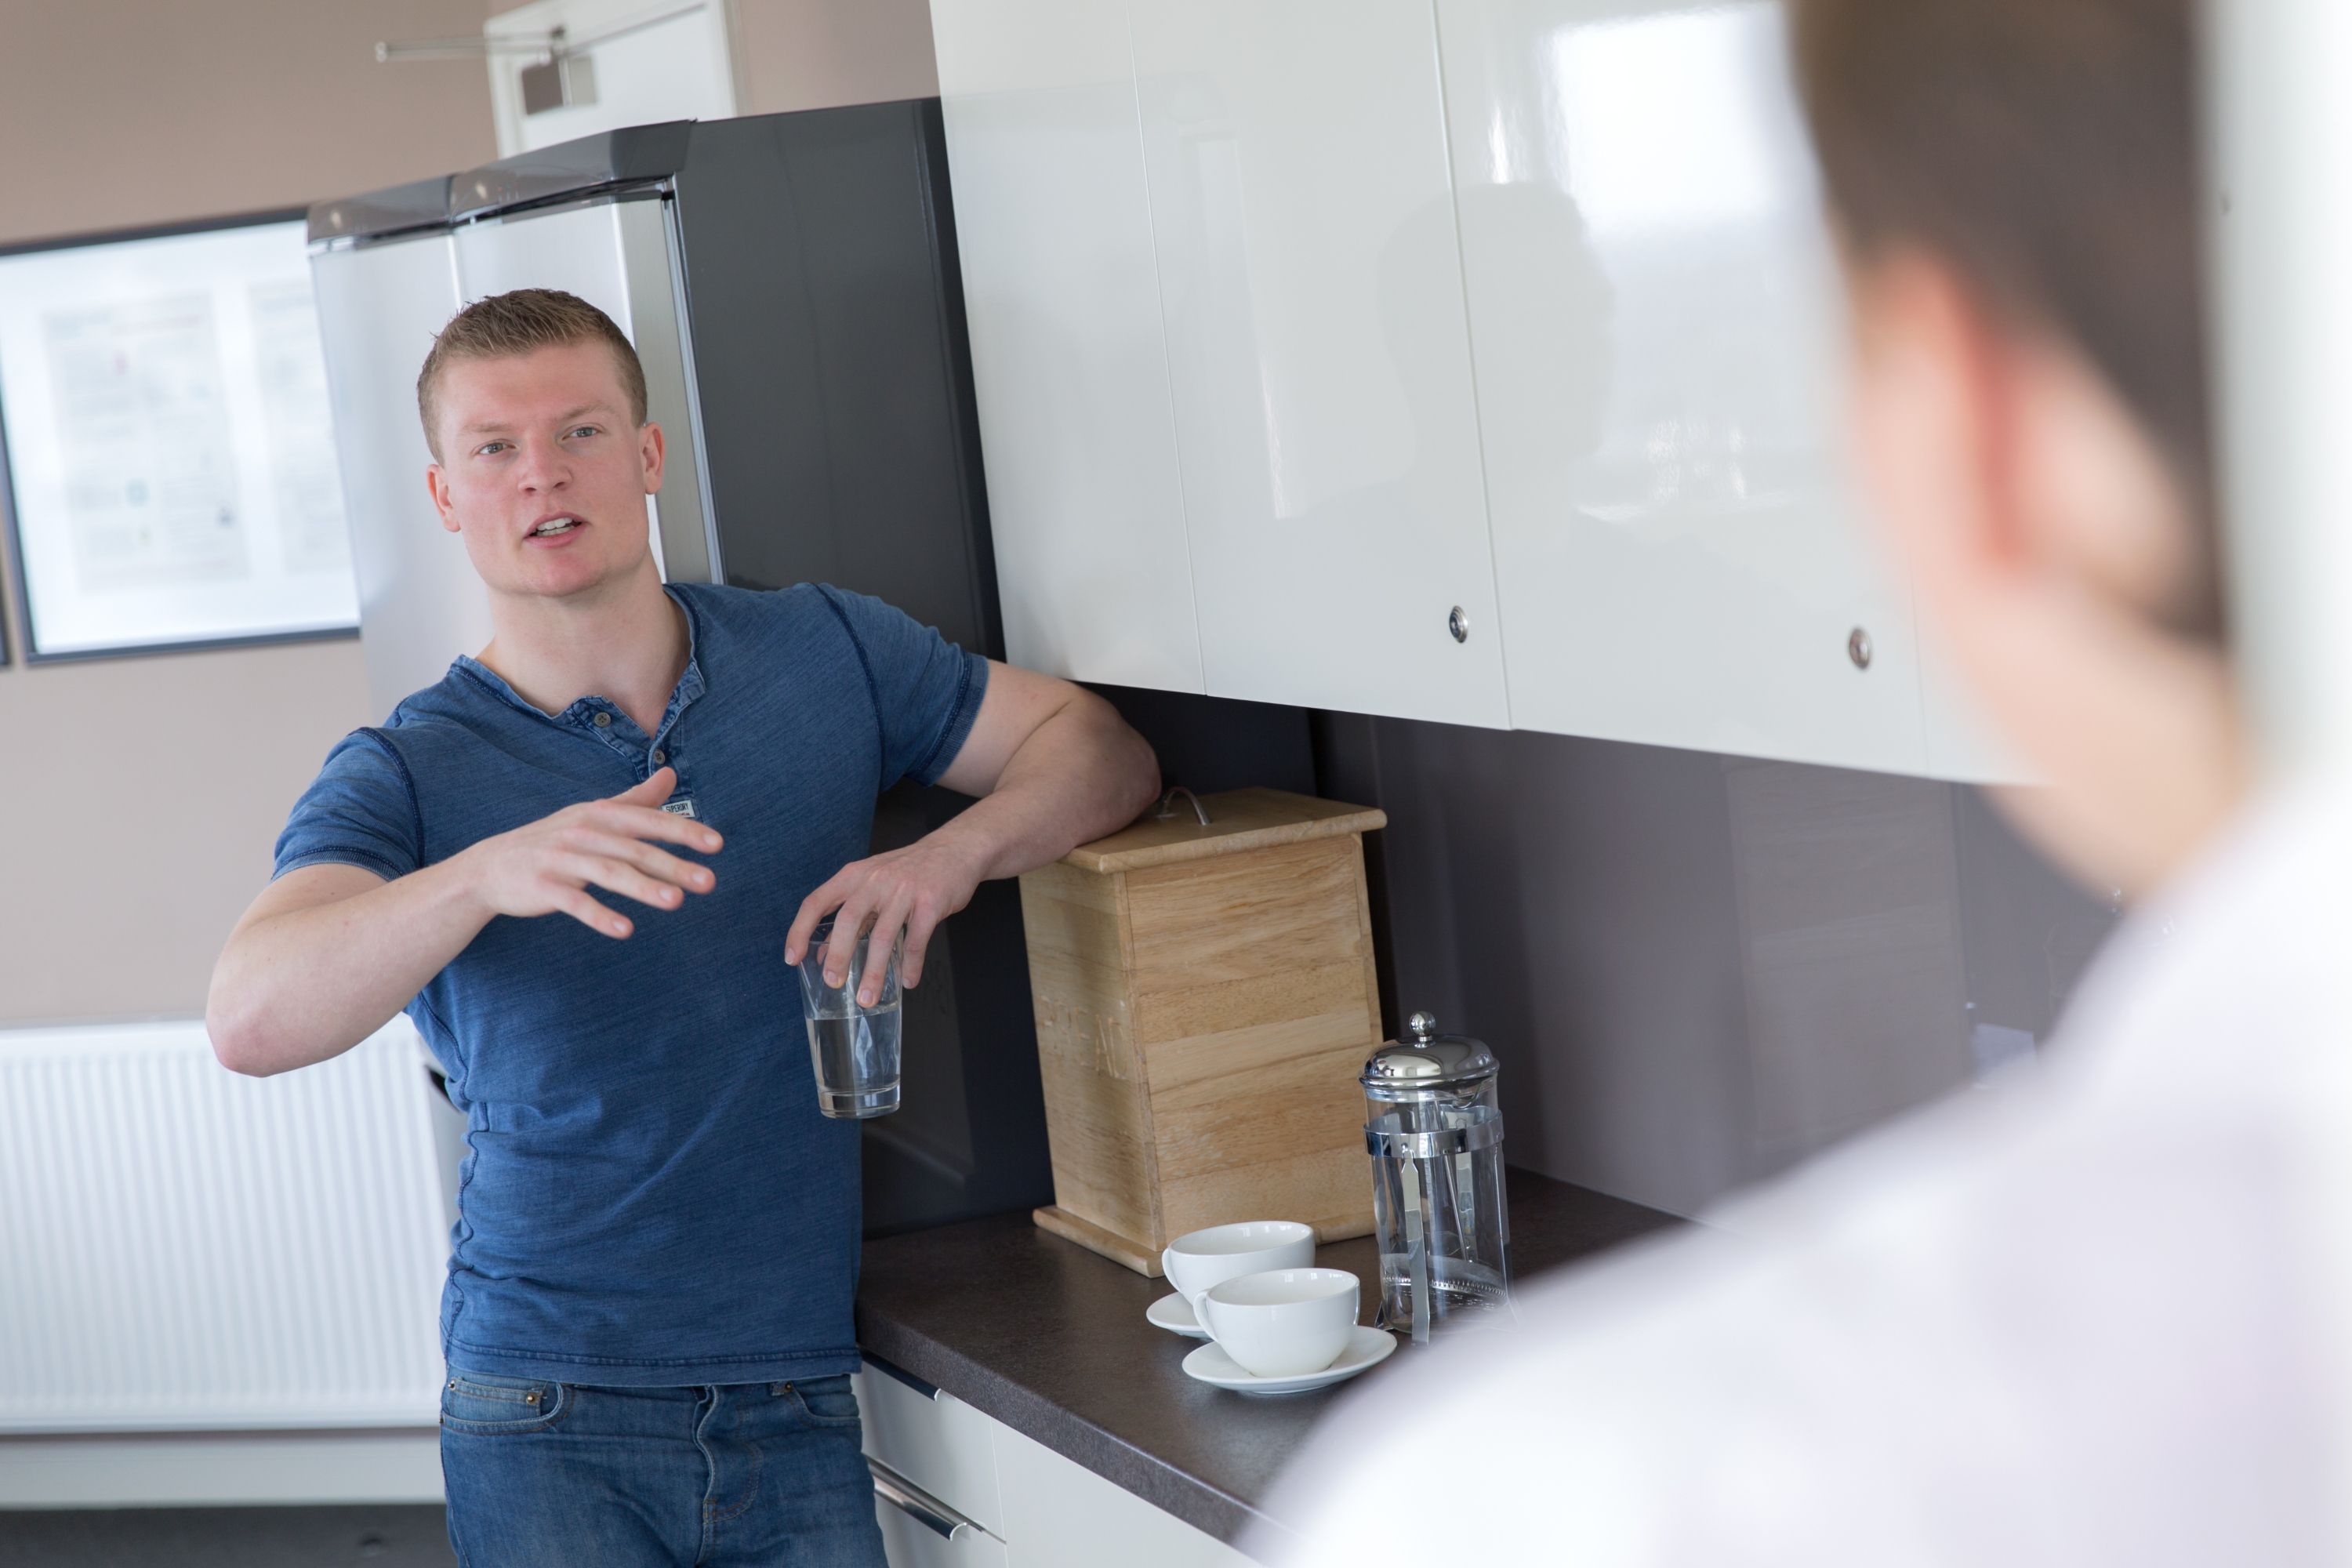 A student chatting in a kitchen